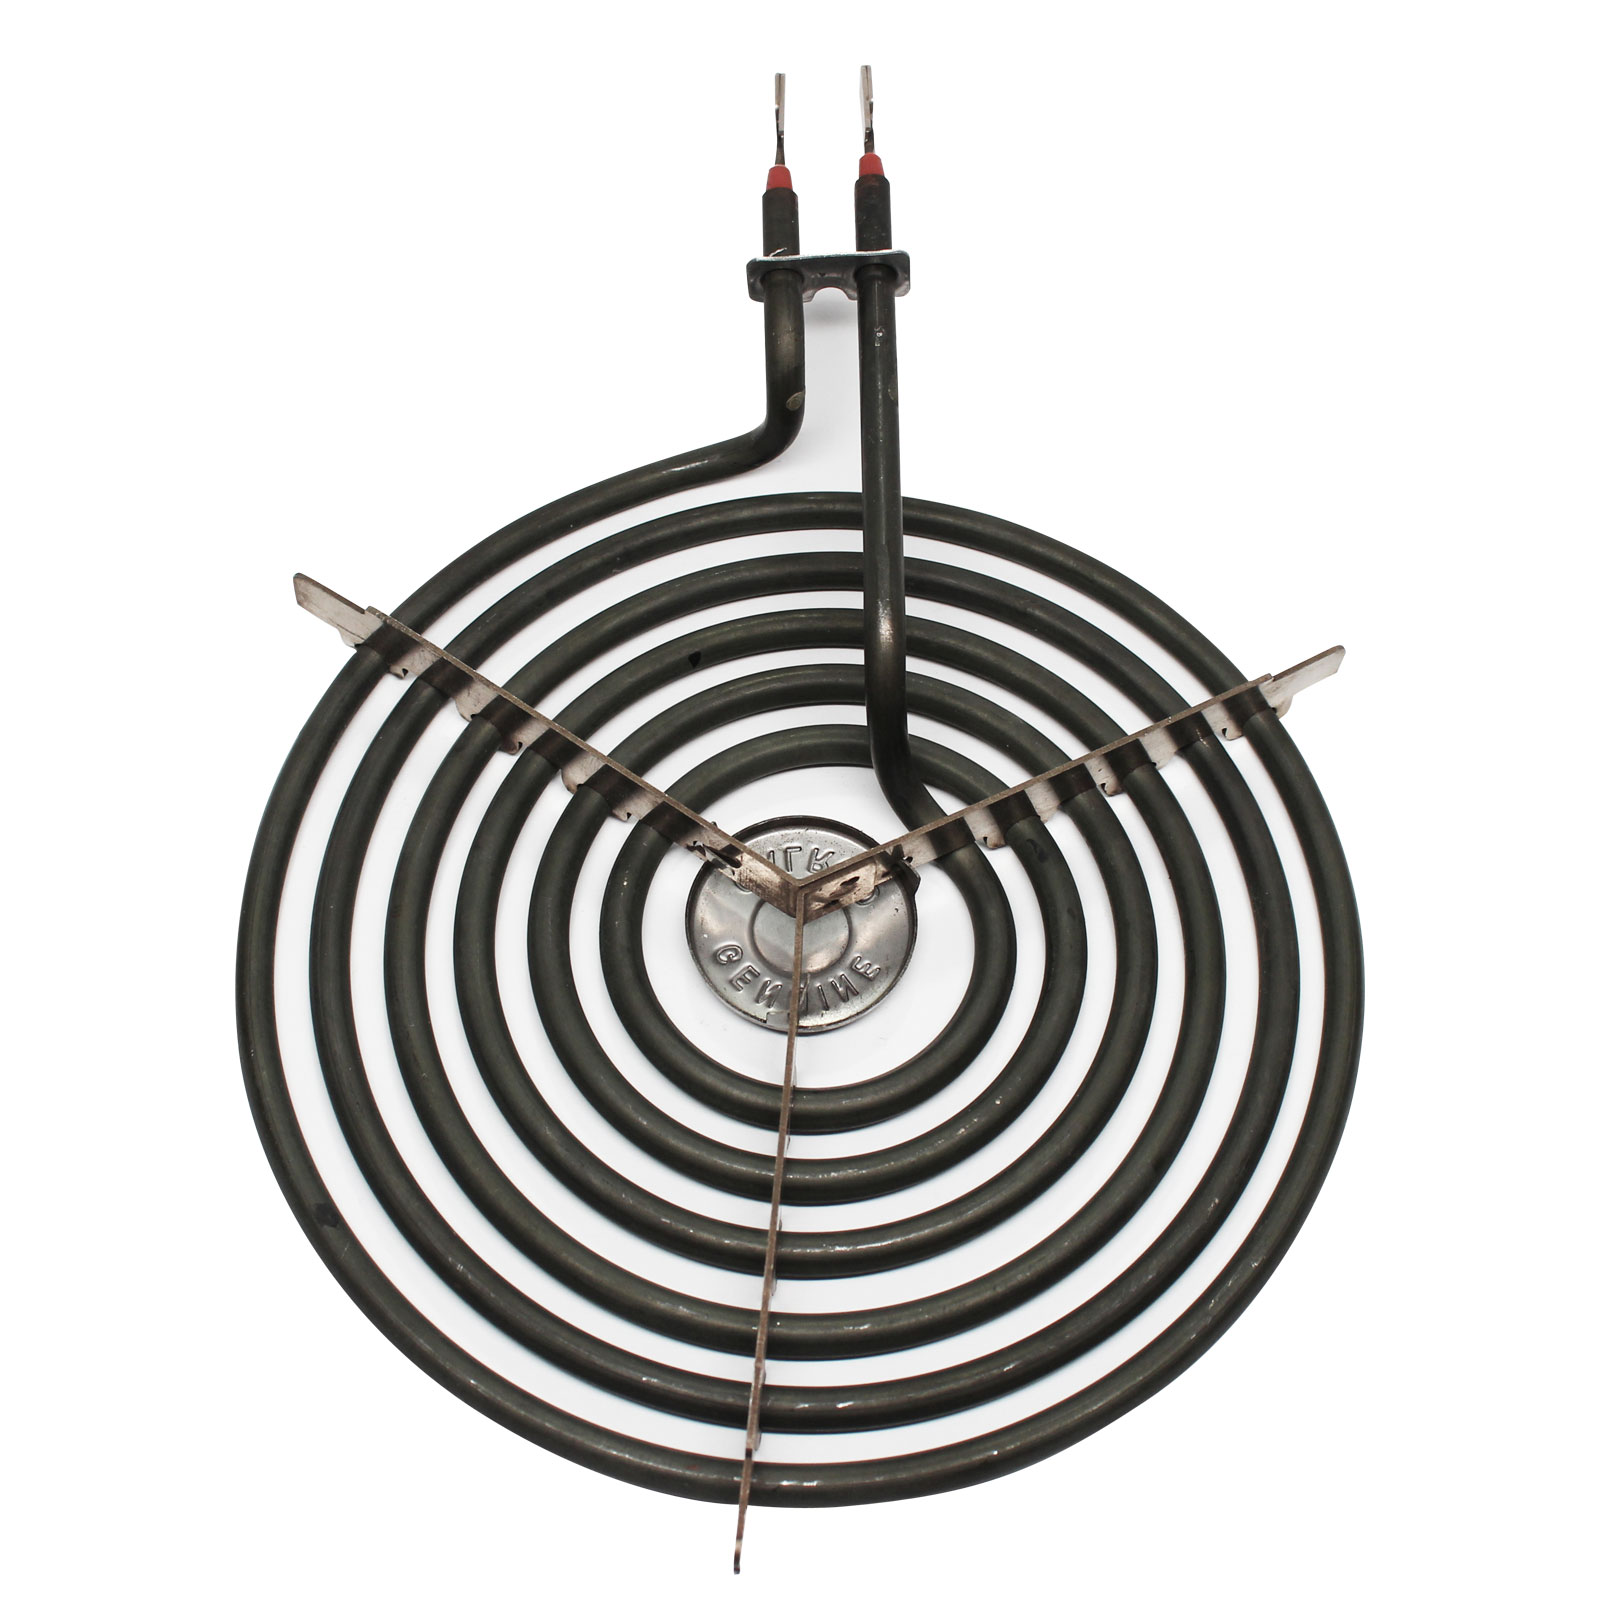 Compatible General Electric JP383B9R1BC 8 inch 6 Turns & 6 inch 5 Turns Surface Burner Elements - Compatible General Electric WB30M1 & WB30M2 Heating Element for Range, Stove & Cooktop - image 4 of 4